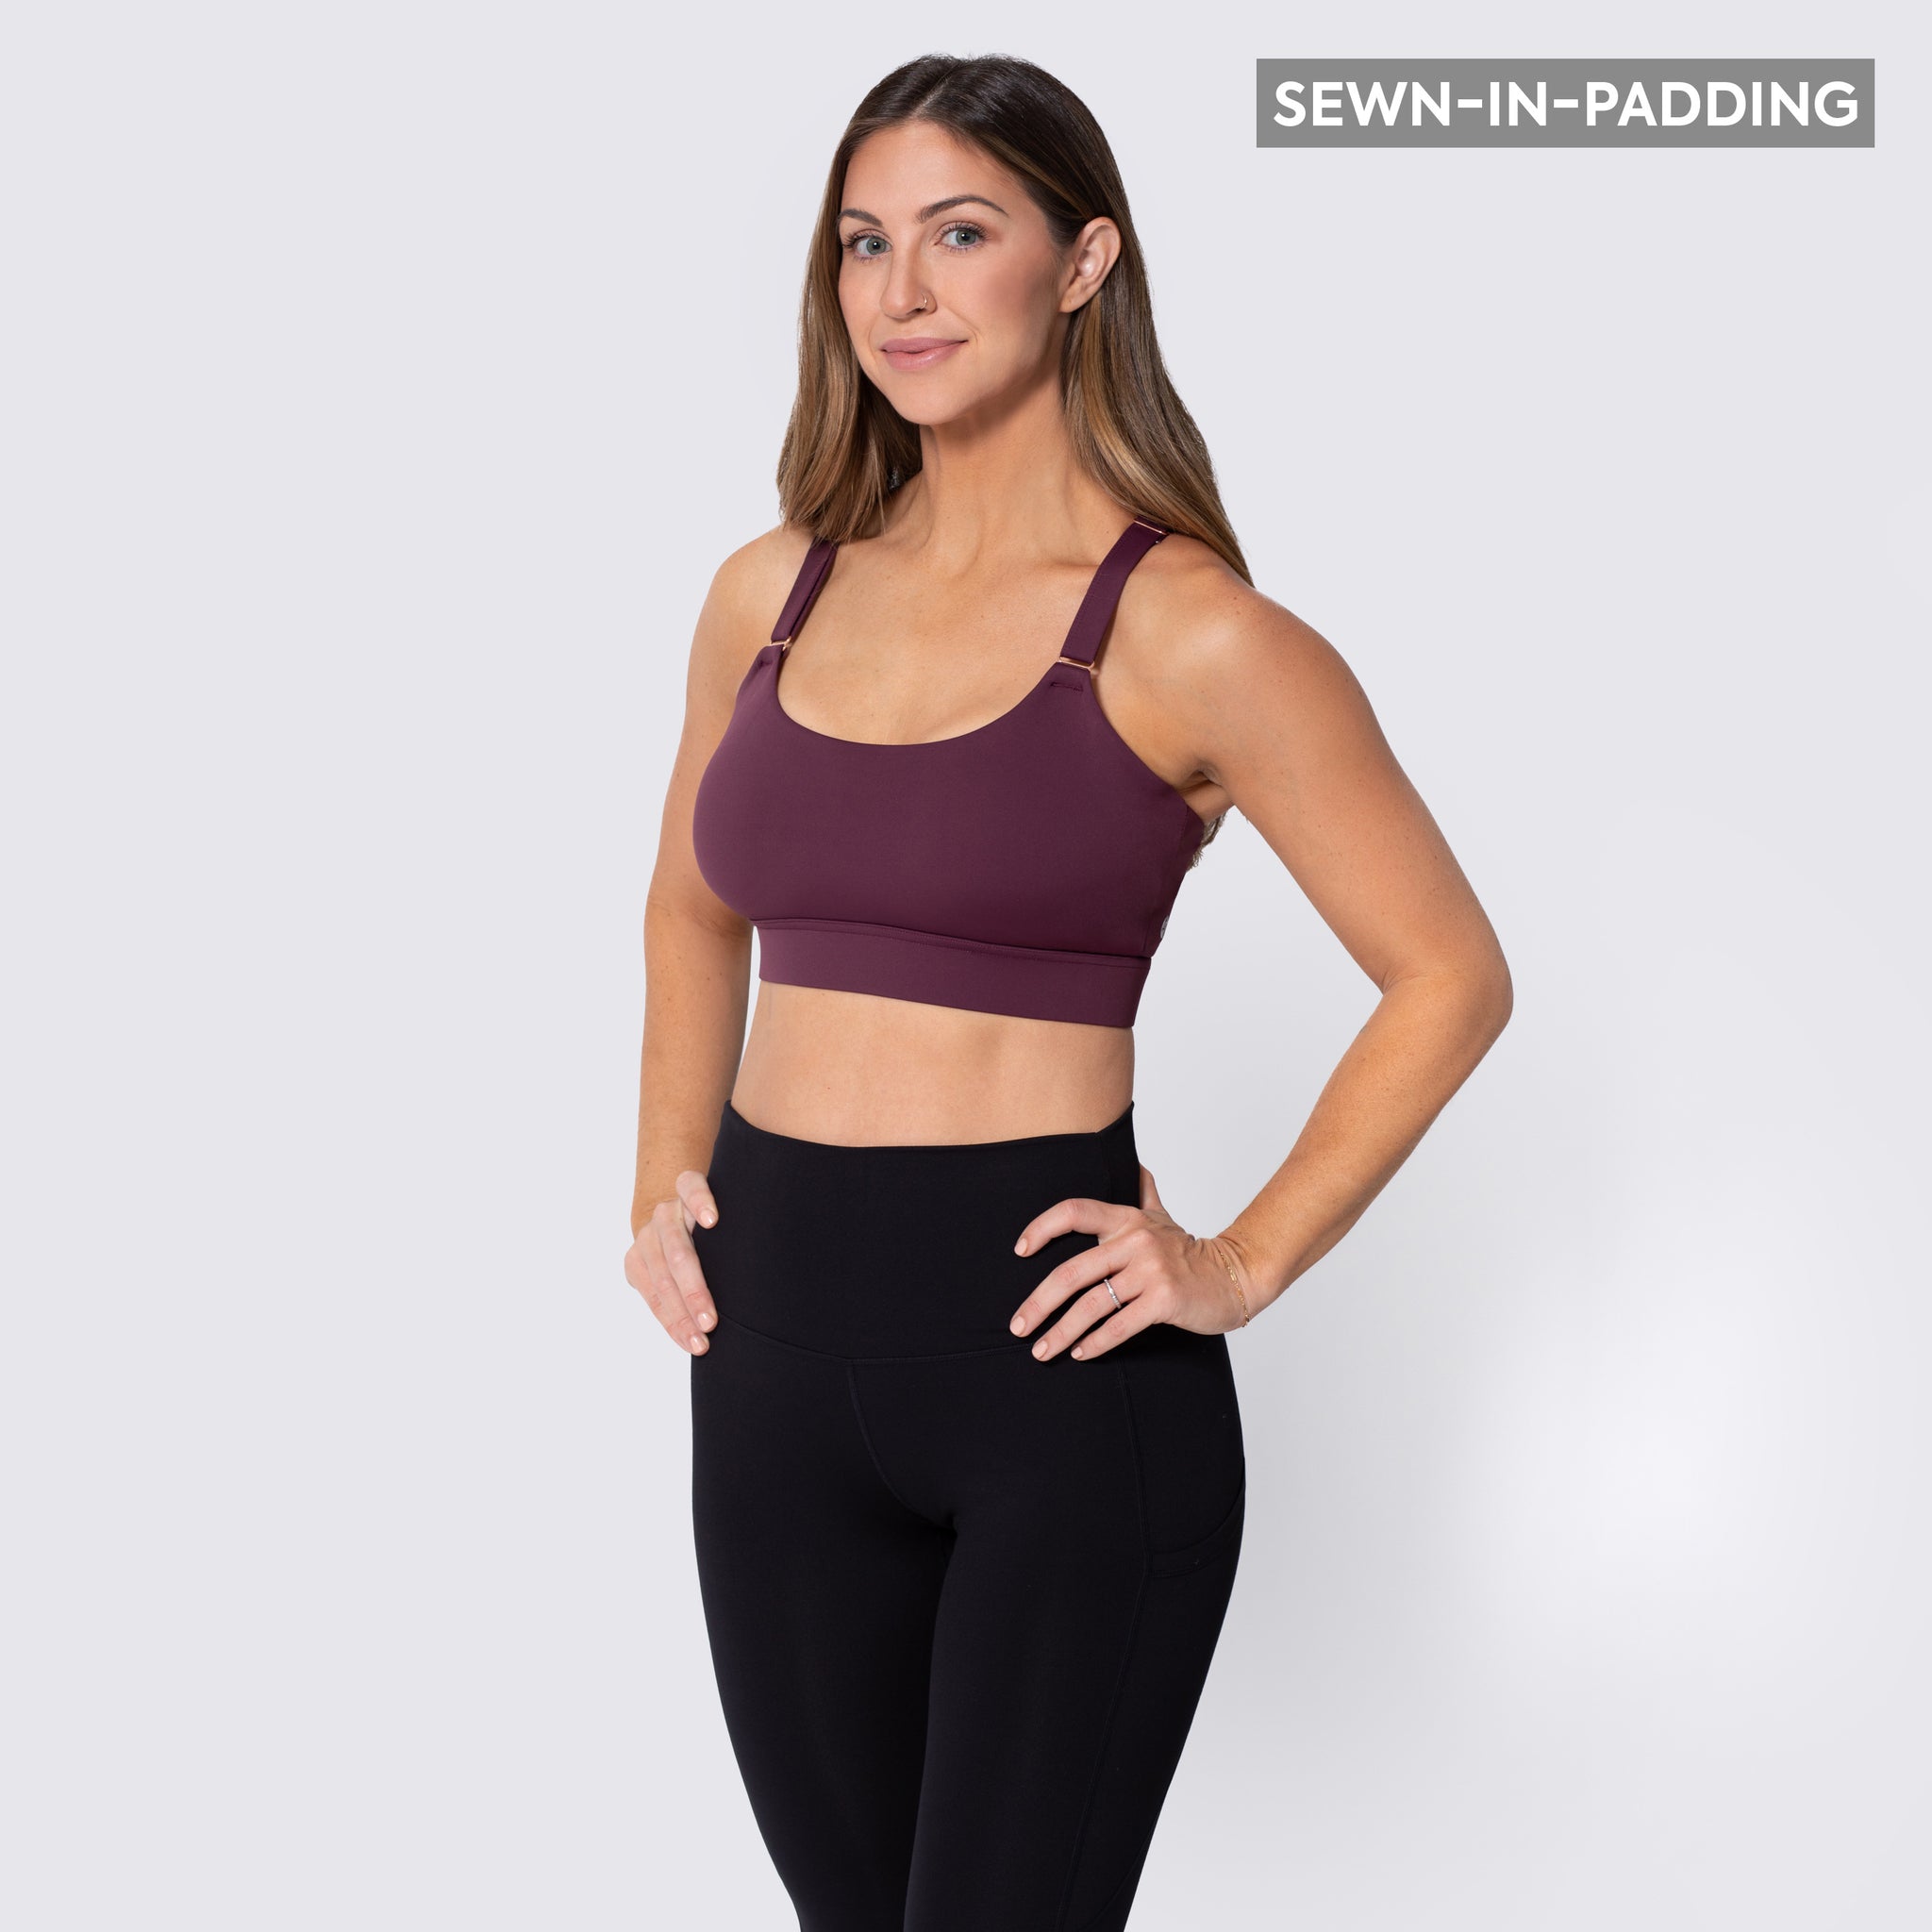 Love and Fit: Innovative Activewear and Athleisure on Instagram: Tired of  leggings that roll down? It's time to invest in comfort and confidence.  Discover our Stay Put Leggings so you can focus